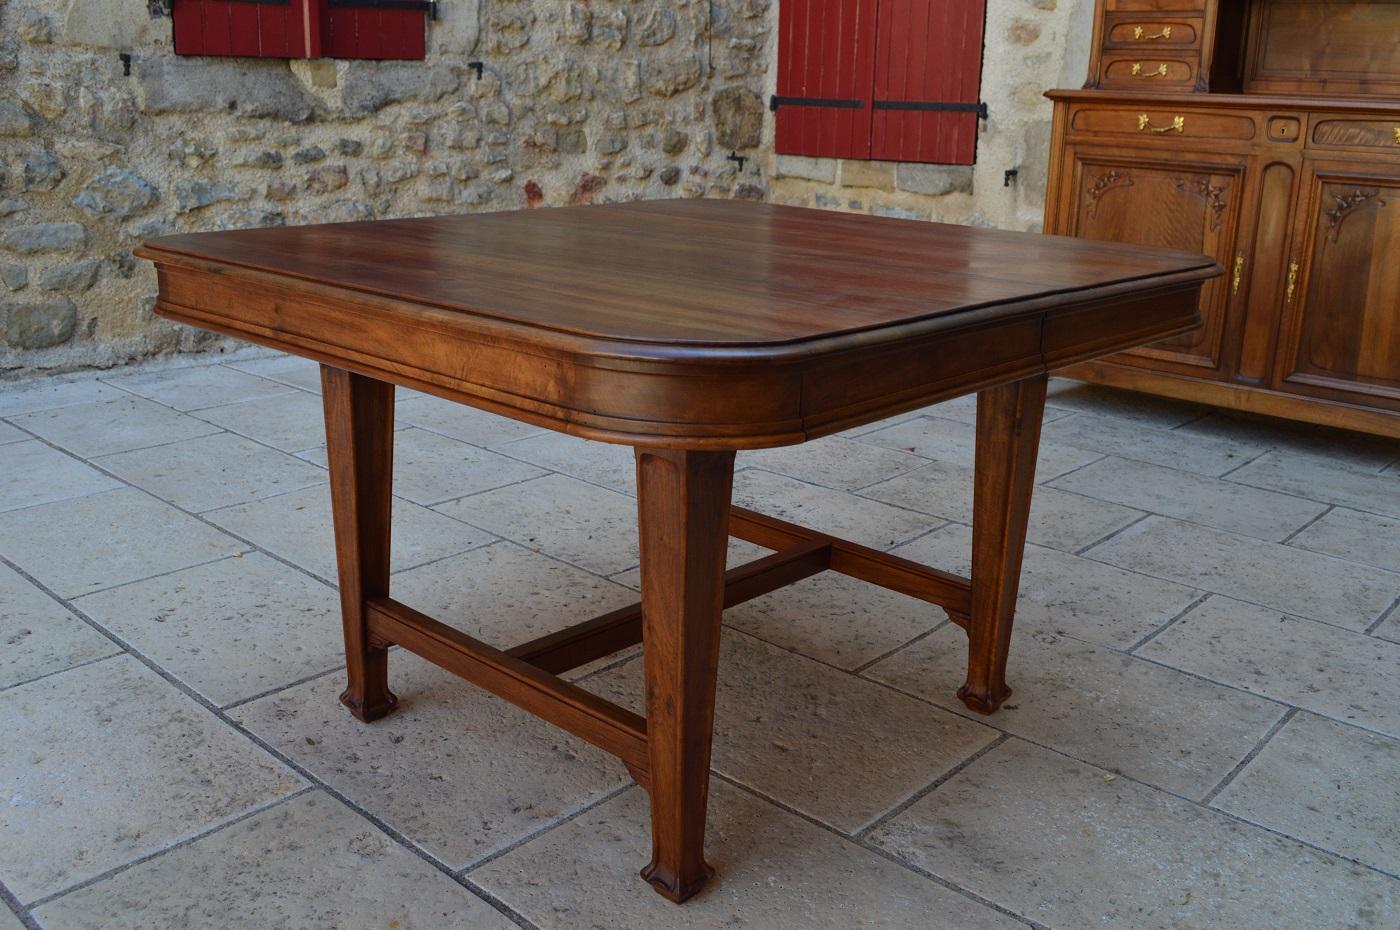 Superb carved solid walnut dining table.
Extensible, sold with its 3 extensions.

Art Nouveau style / 